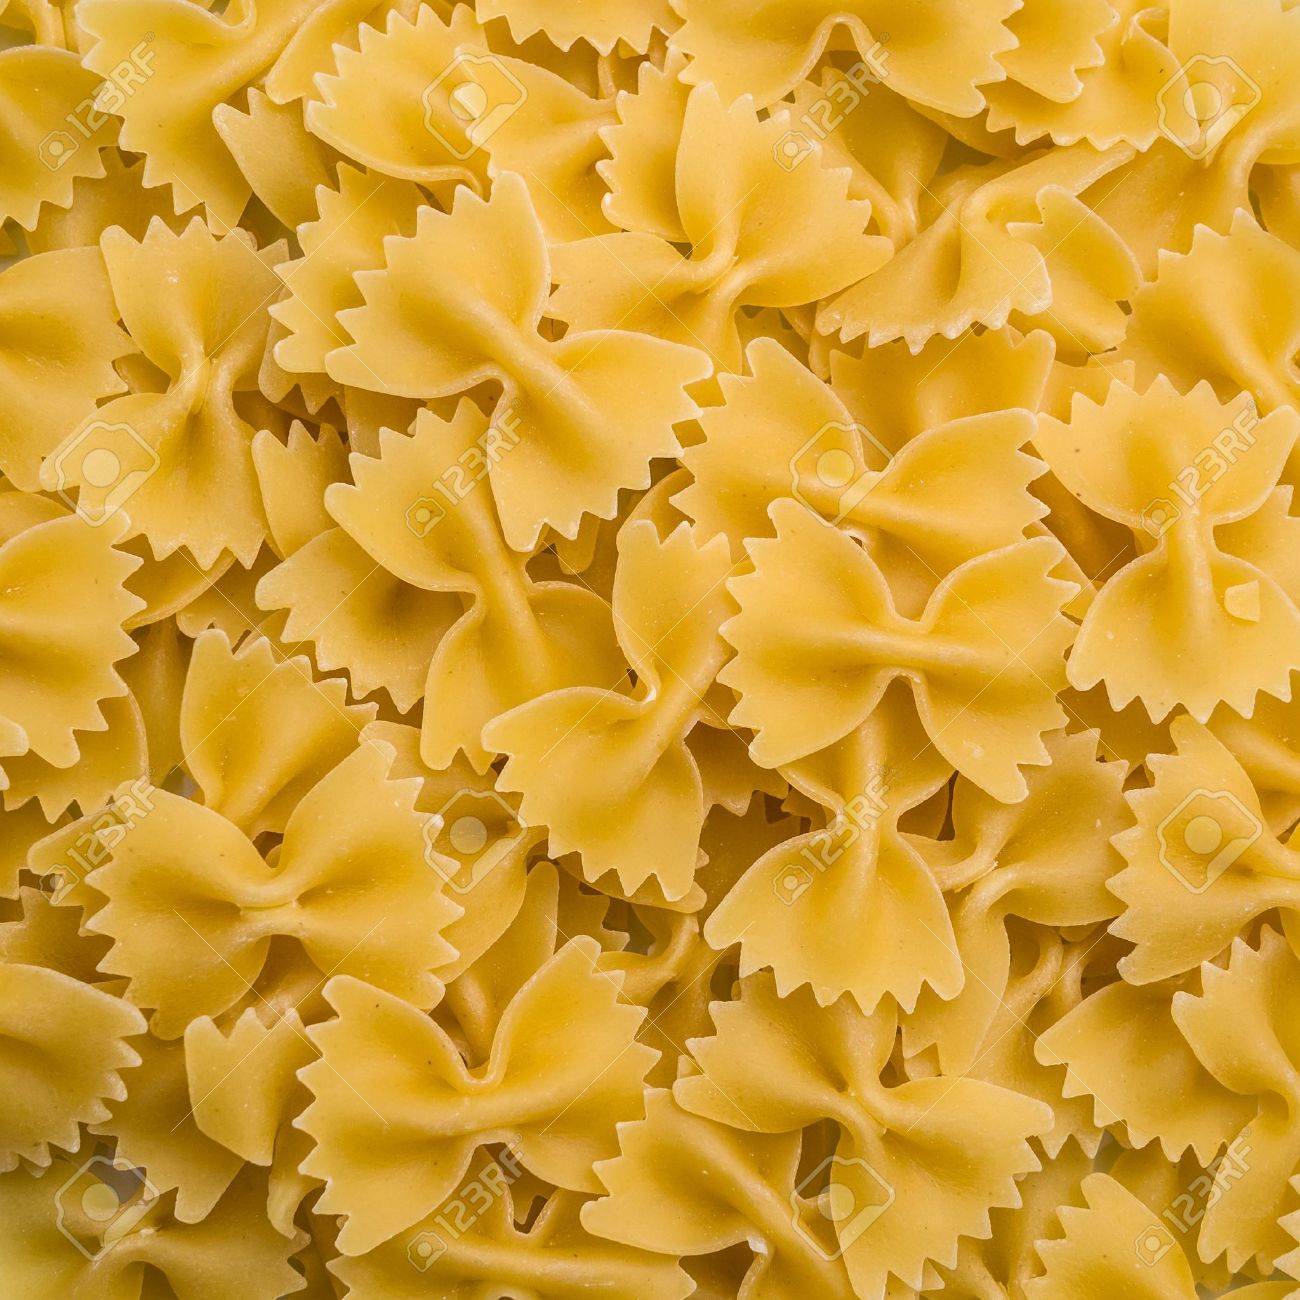 Bowtie Pasta Background Stock Photo Picture And Royalty